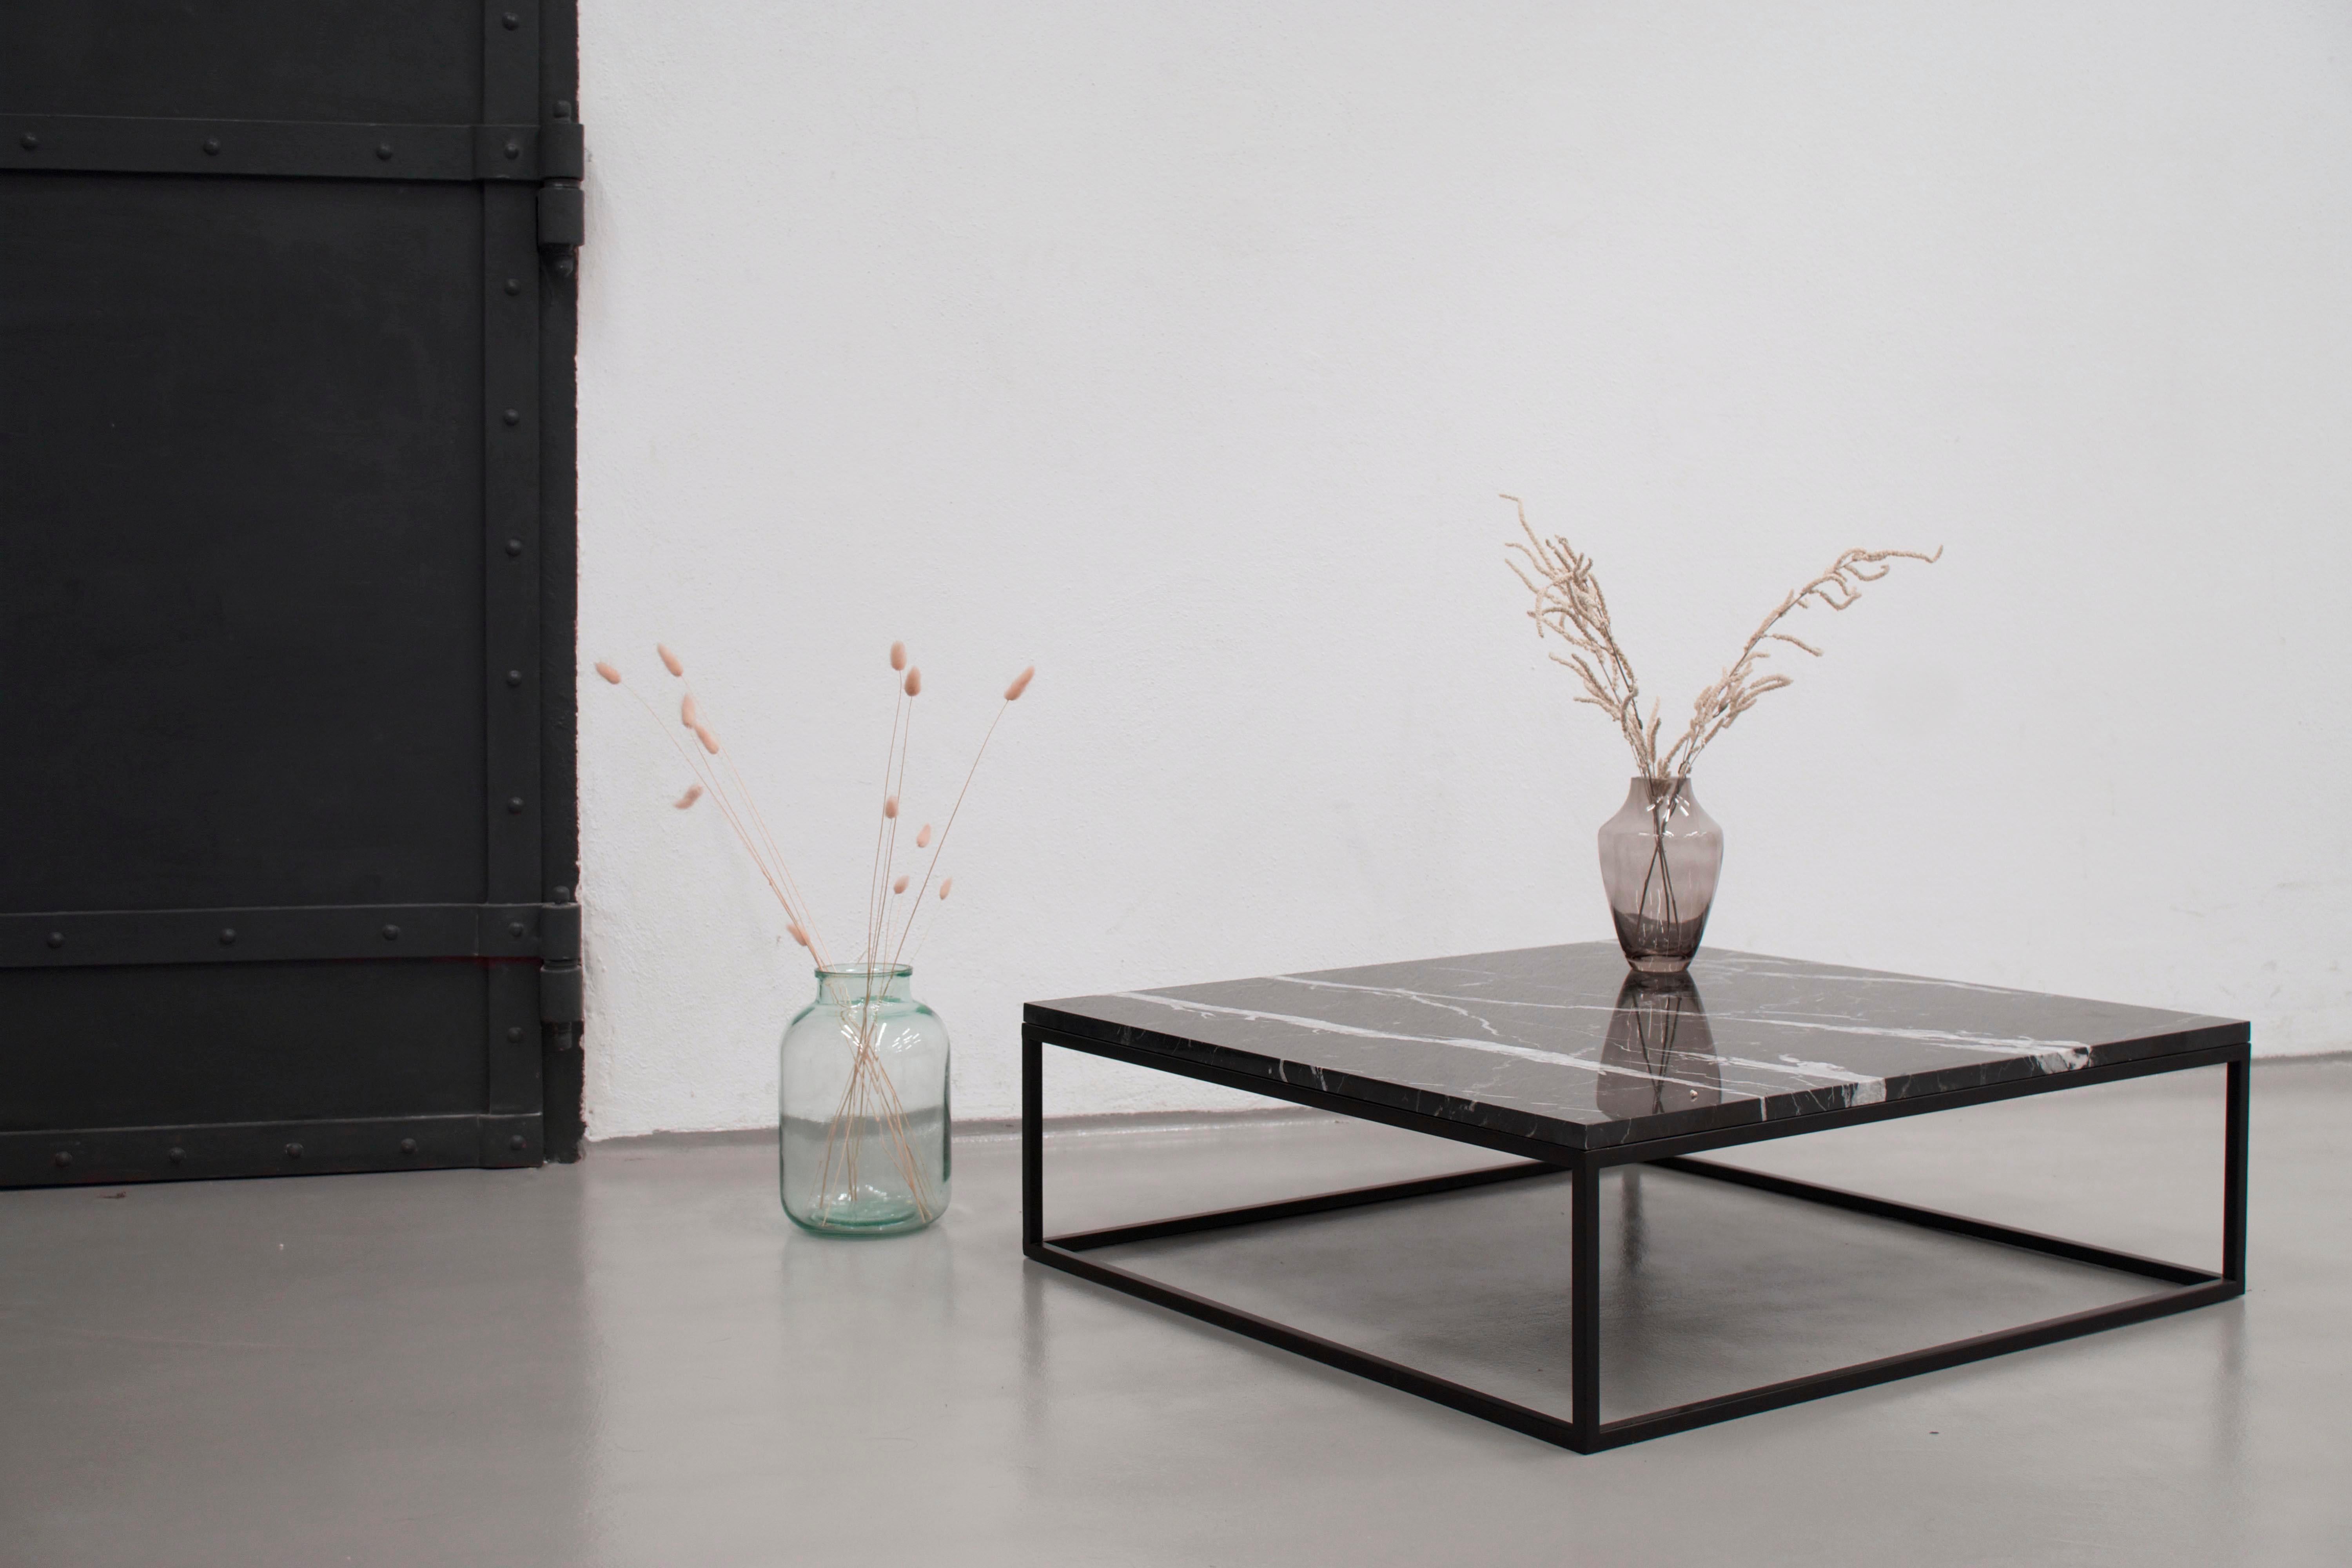 The DIONE coffee table is a fine piece of furniture, drawing attention to its slender, minimalist form. The top is made of black Nero Marquina marble or white Carrara marble. 
The table has a modern feel thanks to its low height, and it will go a